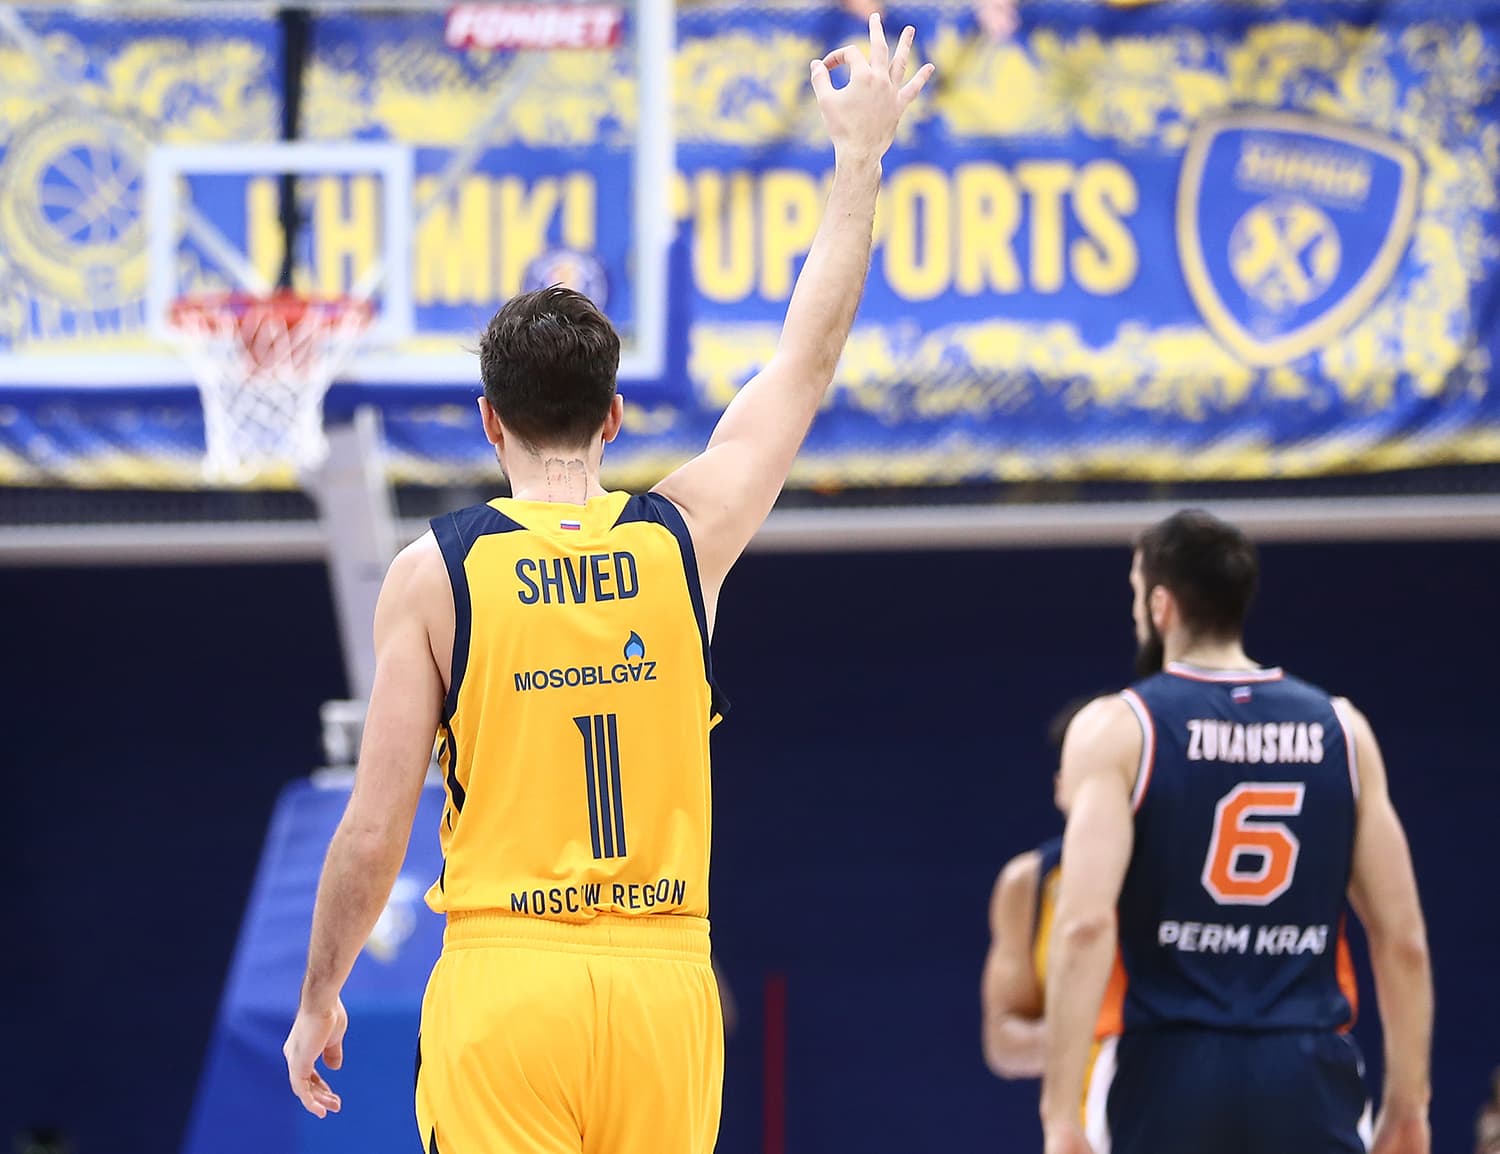 Champions recover, Juskevicius vs Shved, and Hicks’ showtime return. Week in review